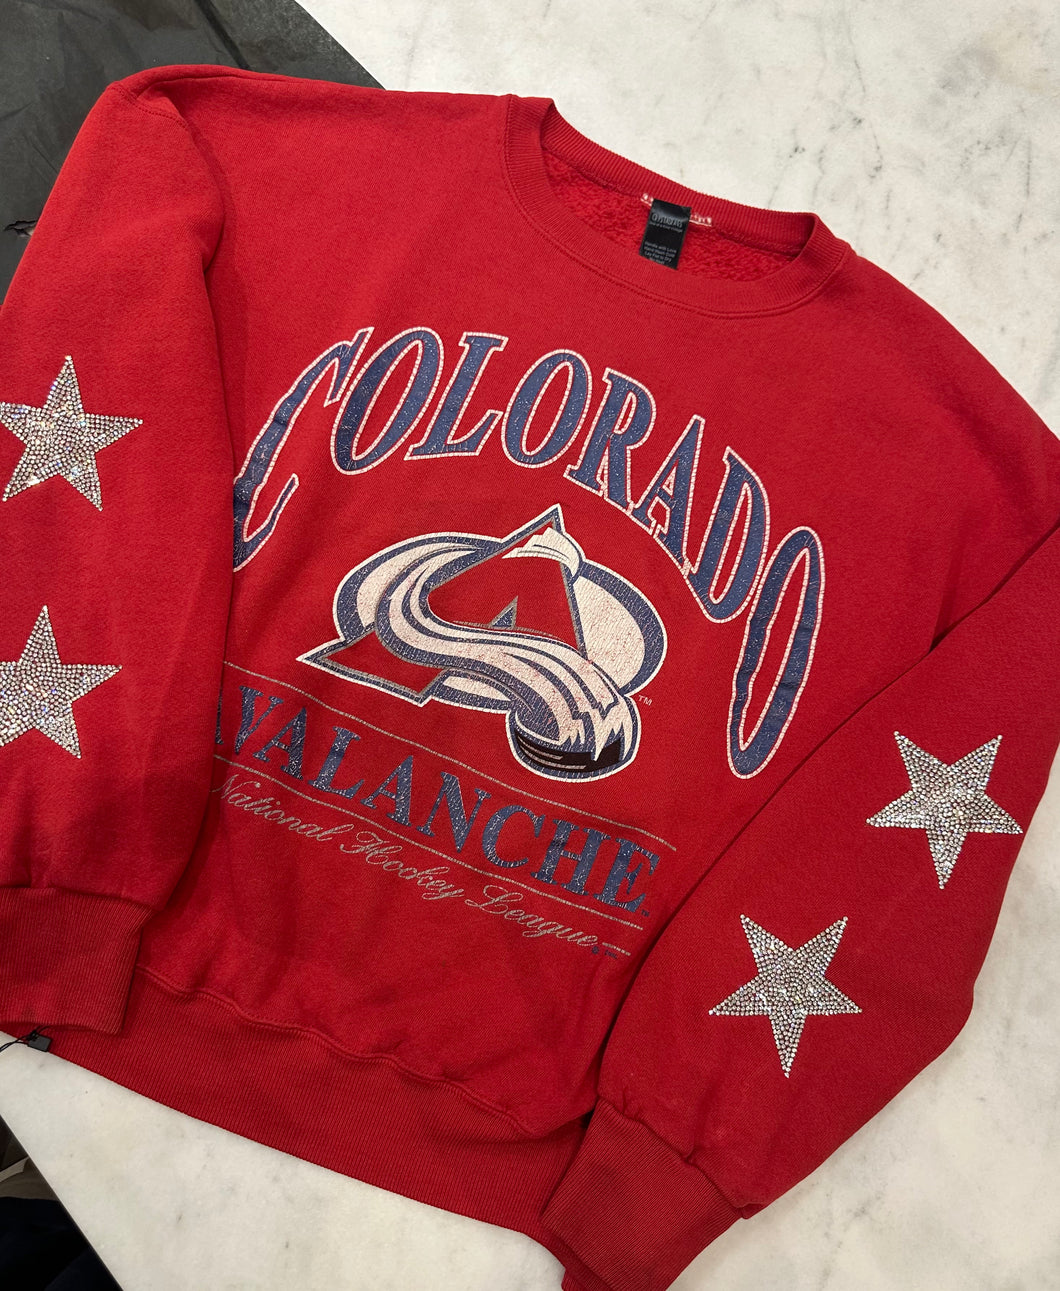 Denver Colorado Avalanche, NHL One of a KIND Vintage Sweatshirt with Crystal Star Design With Custom Name & Number